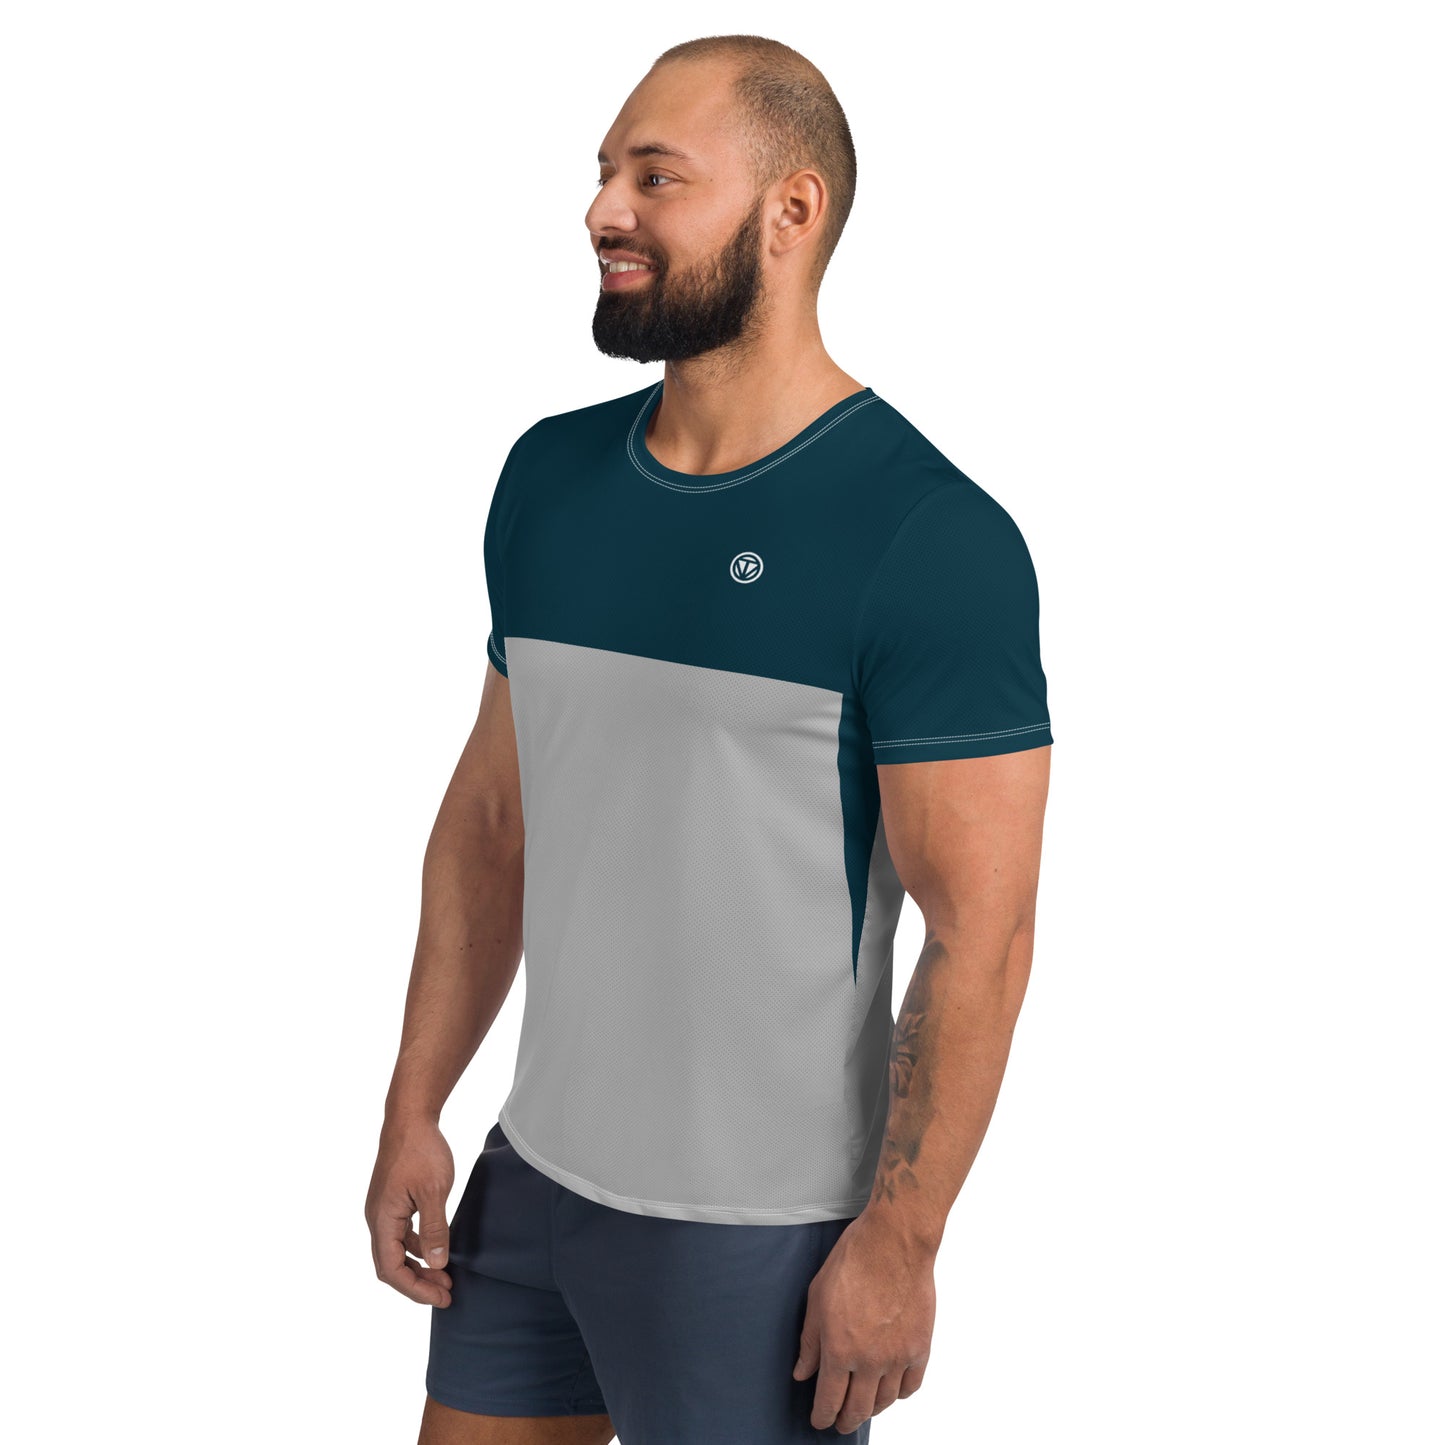 TIME OF VIBES - Men's Athletic T-shirt PART (Blue/Grey) - €45.00